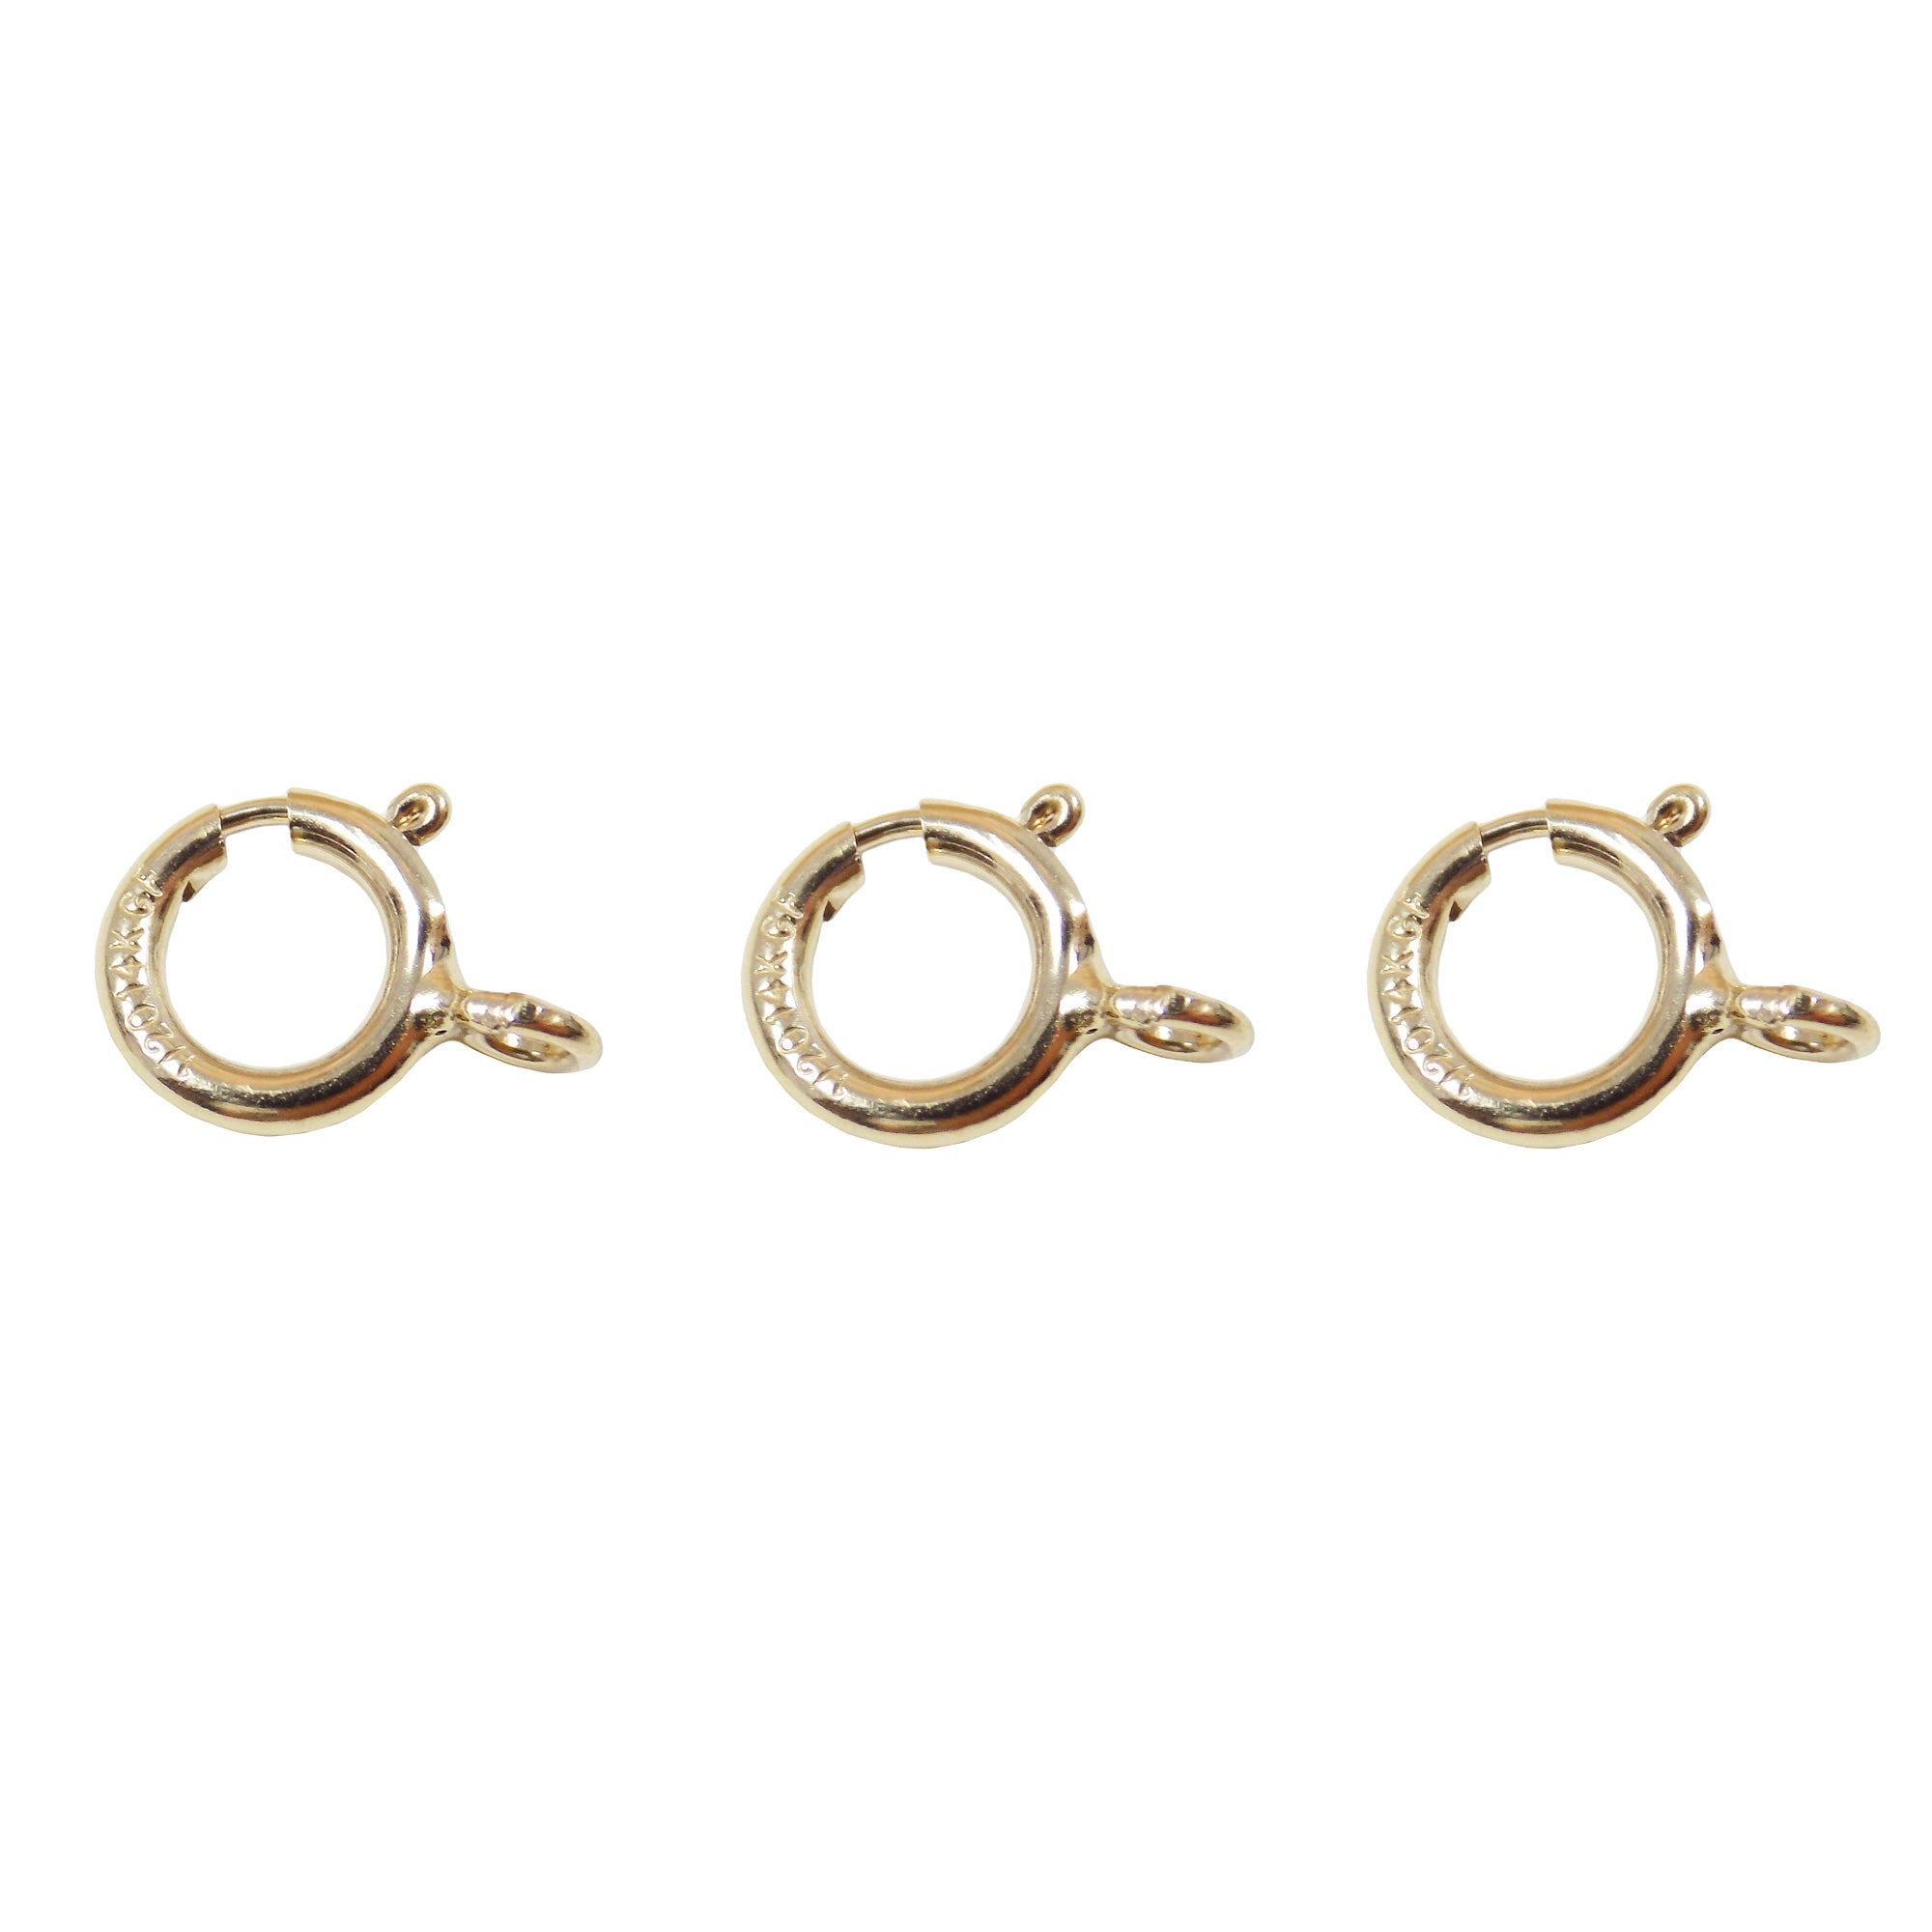 Spring Ring Clasp 6mm. 14 K Gold Filledw/ closed ring.